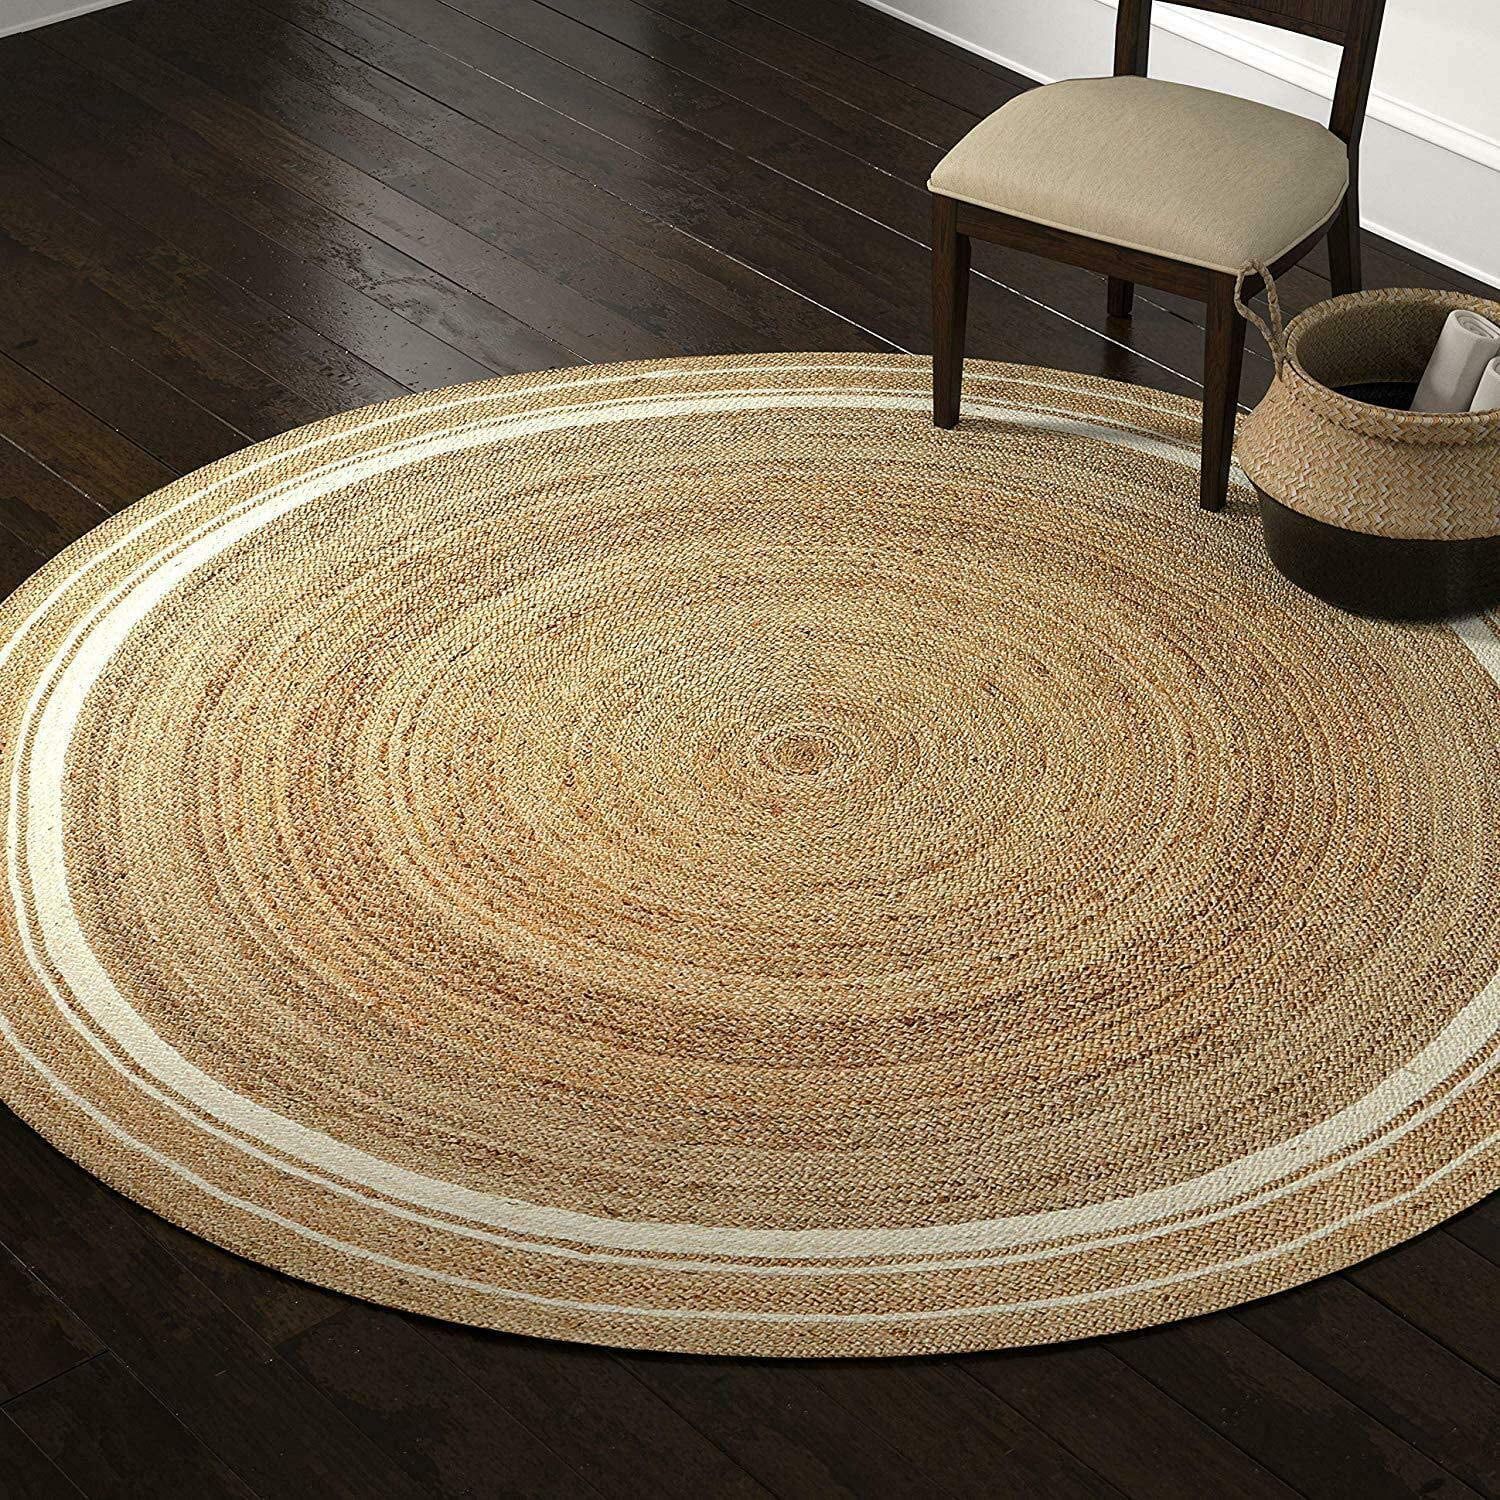 White Border Handmade Hand Woven Boho Braided Jute Area Rug Natural Fibers Round  Rugs For Living Room, Kitchen, Indoor & Outdoor Carpet  2” Feet (24 Inch) –  Walmart With Border Round Rugs (View 12 of 15)